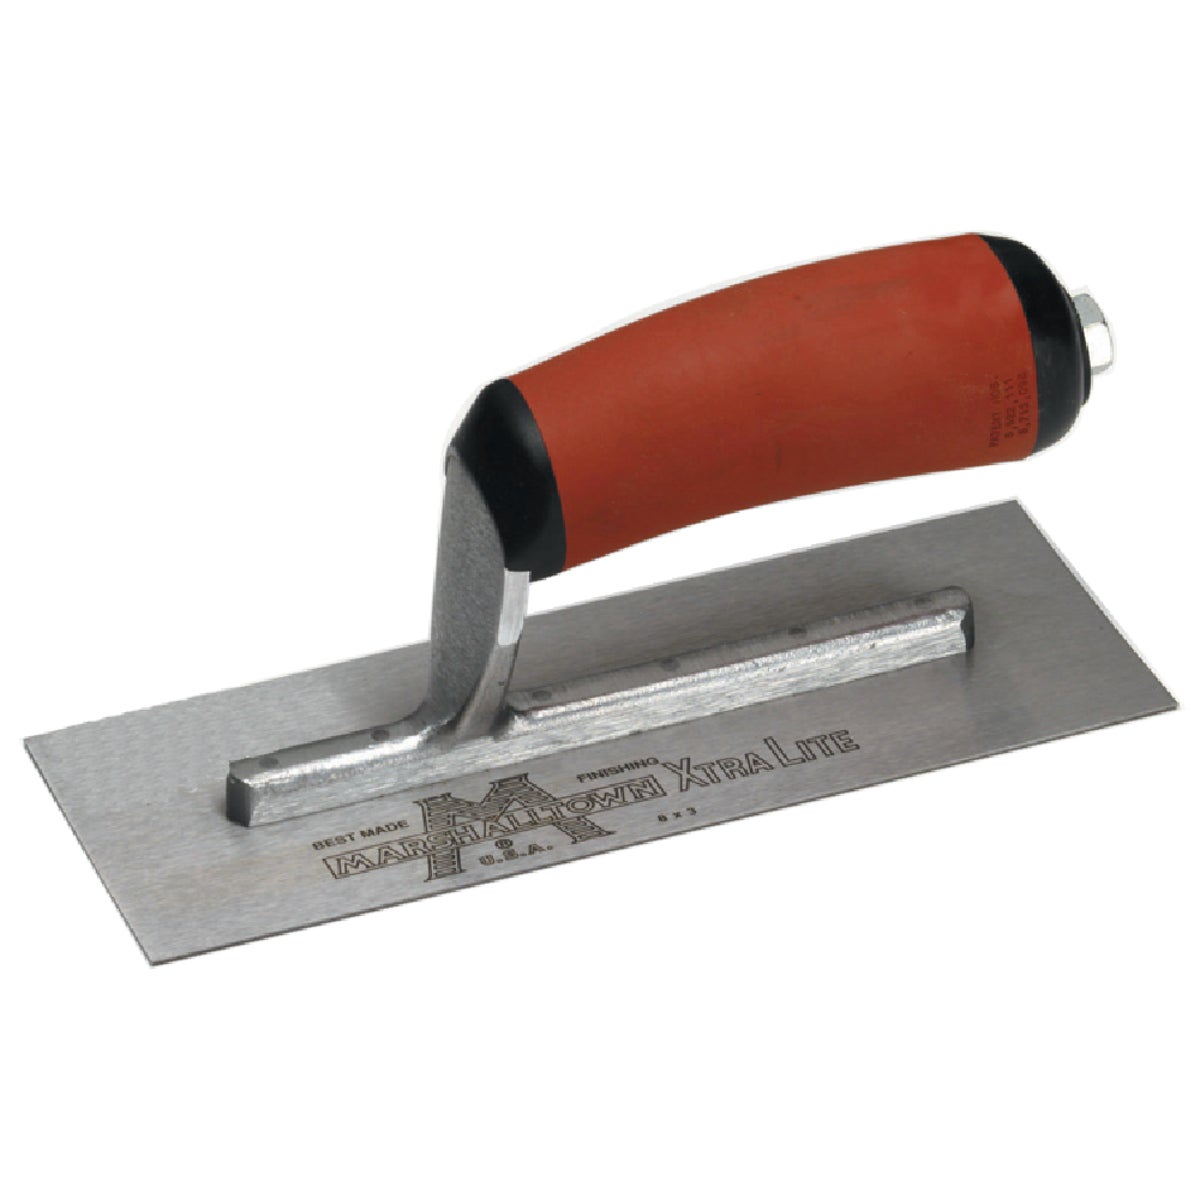 Marshalltown 4-1/2 In. x 11 In. High Carbon Steel Finishing Trowel with Curved DuraSoft Handle